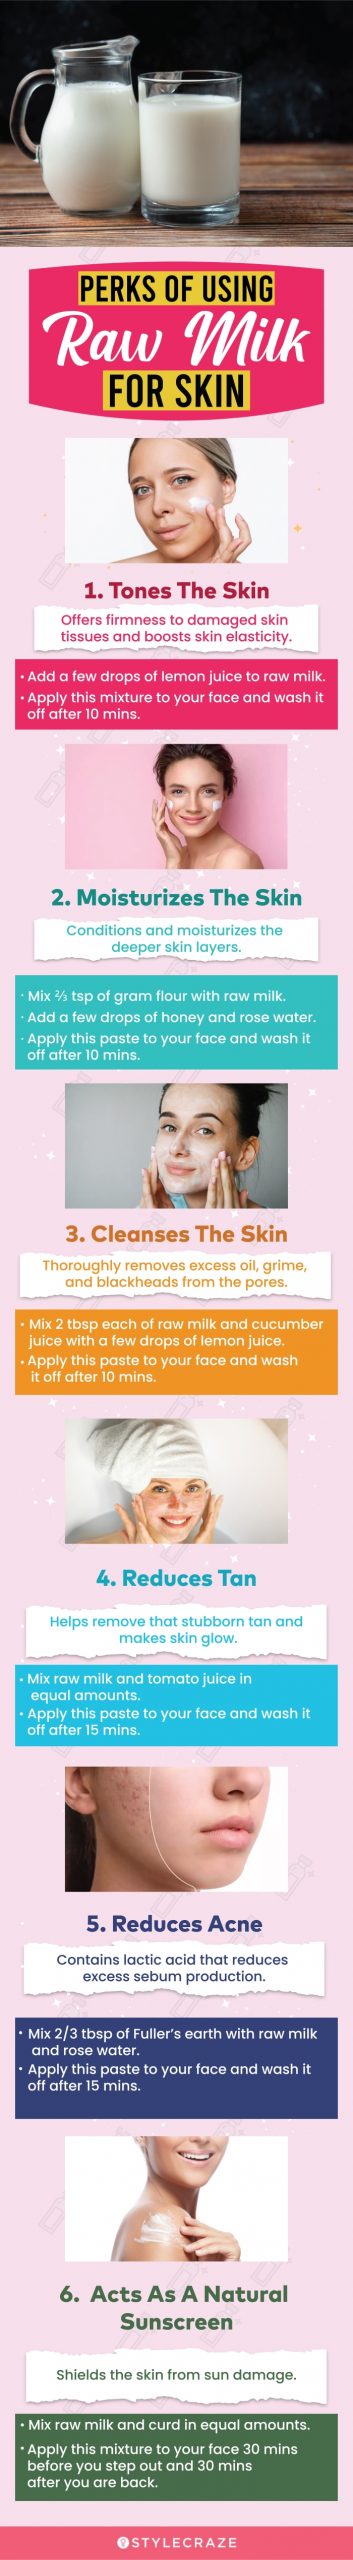 12 Impressive Benefits Of Raw Milk For Your Skin